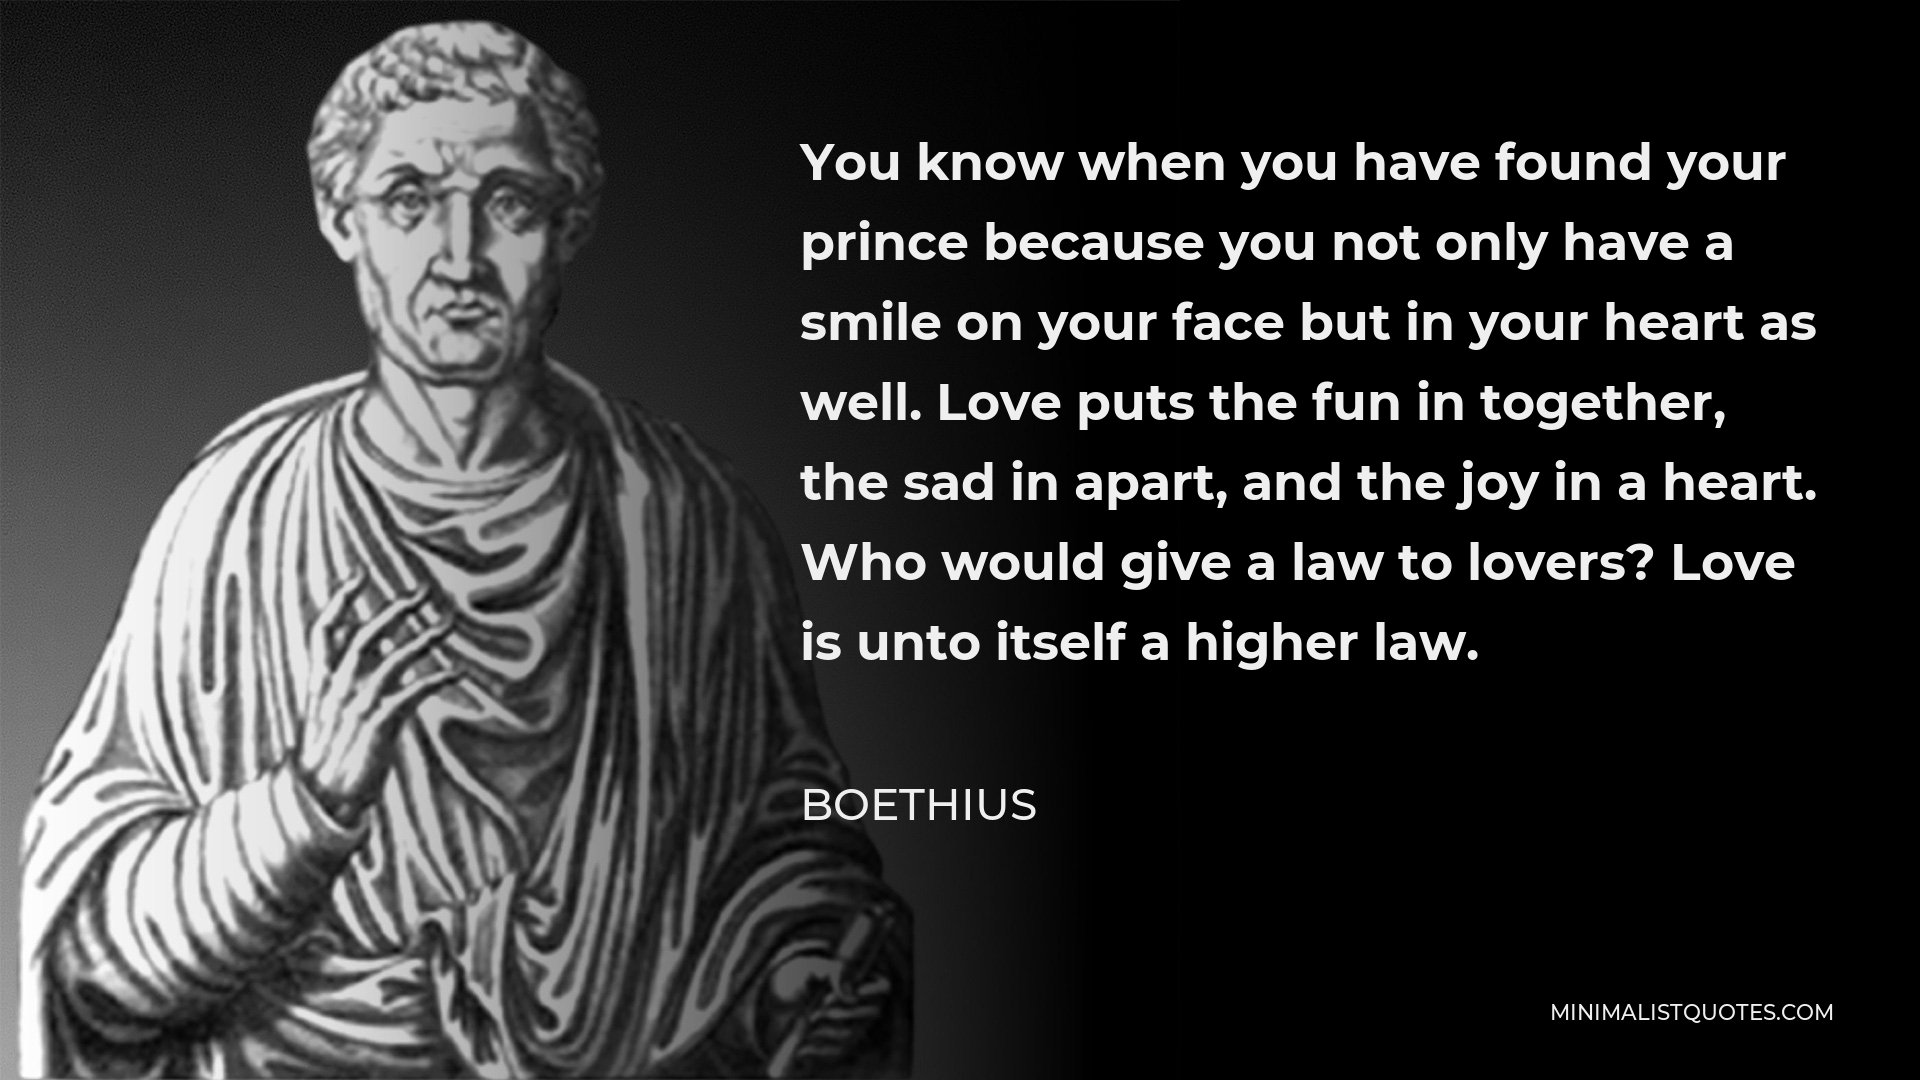 Boethius Quote - You know when you have found your prince because you not only have a smile on your face but in your heart as well. Love puts the fun in together, the sad in apart, and the joy in a heart. Who would give a law to lovers? Love is unto itself a higher law.